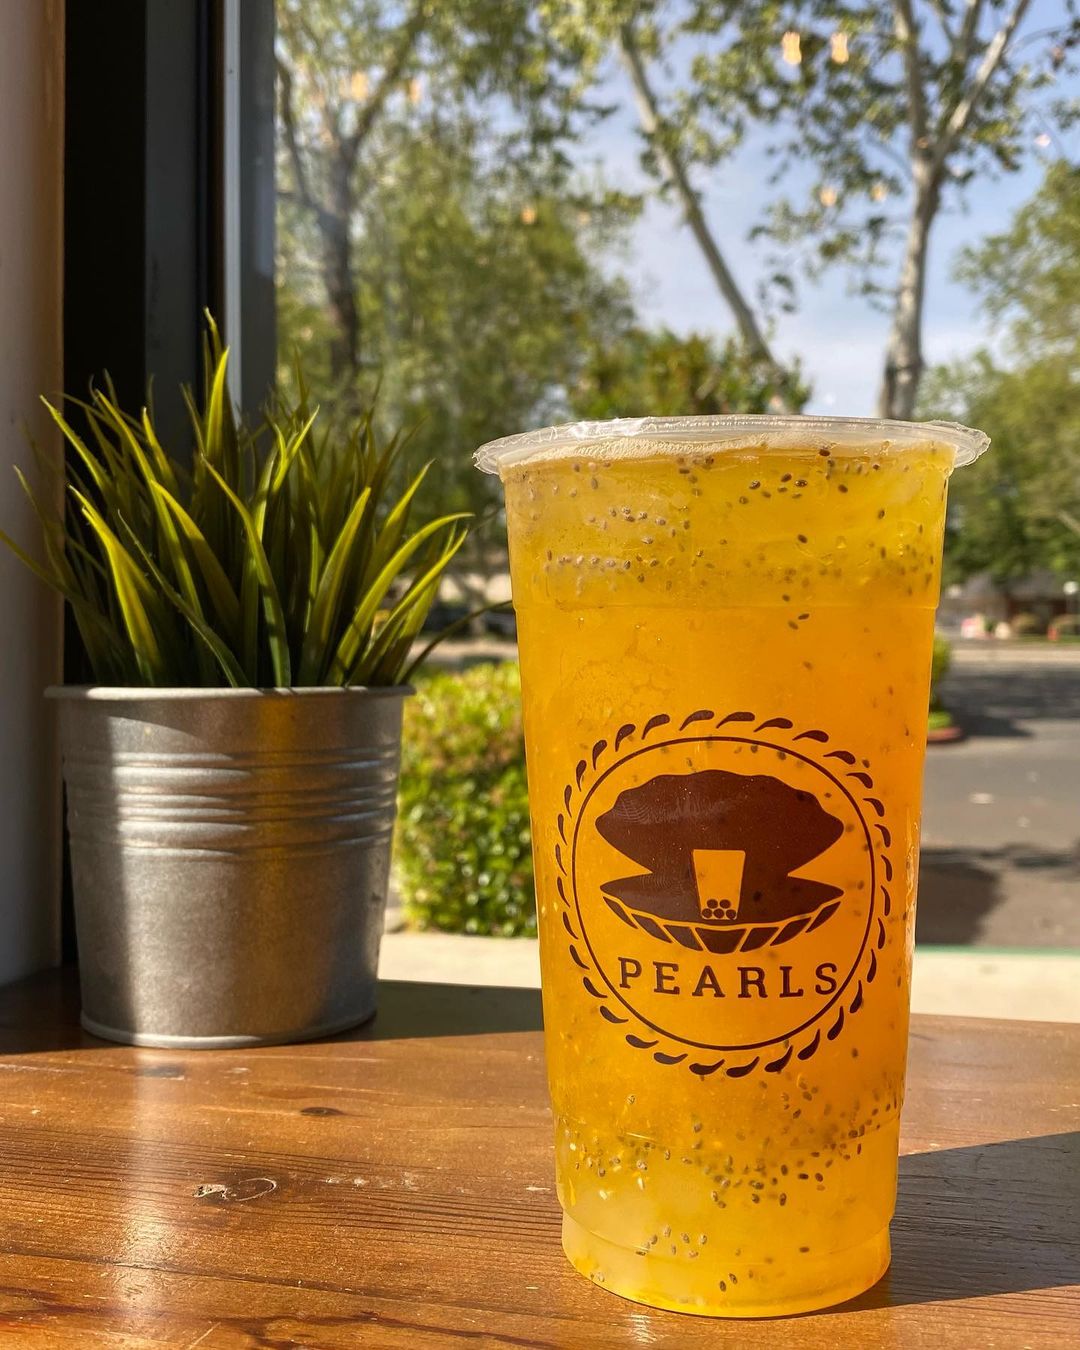 A tall cup of boba tea by Pearls on a table. Photo by Instagram user @sacpearls.